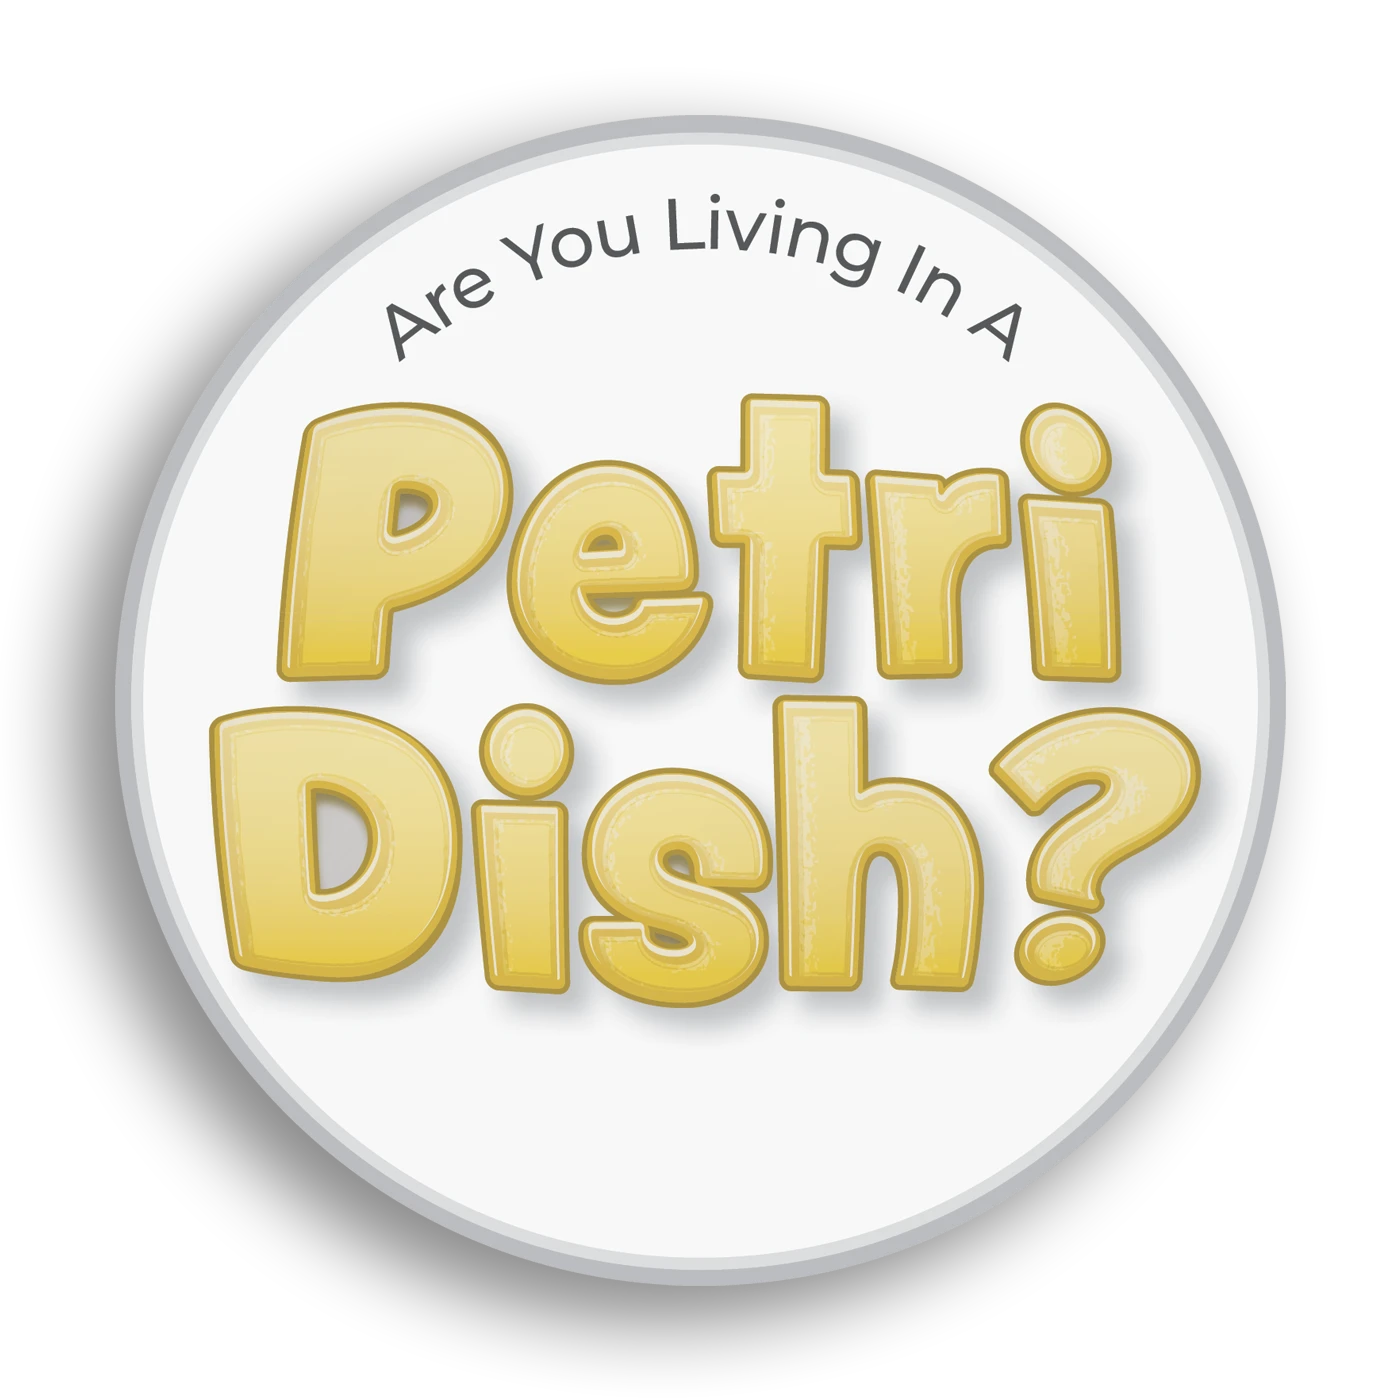 "Are You Living In A Petri Dish?"